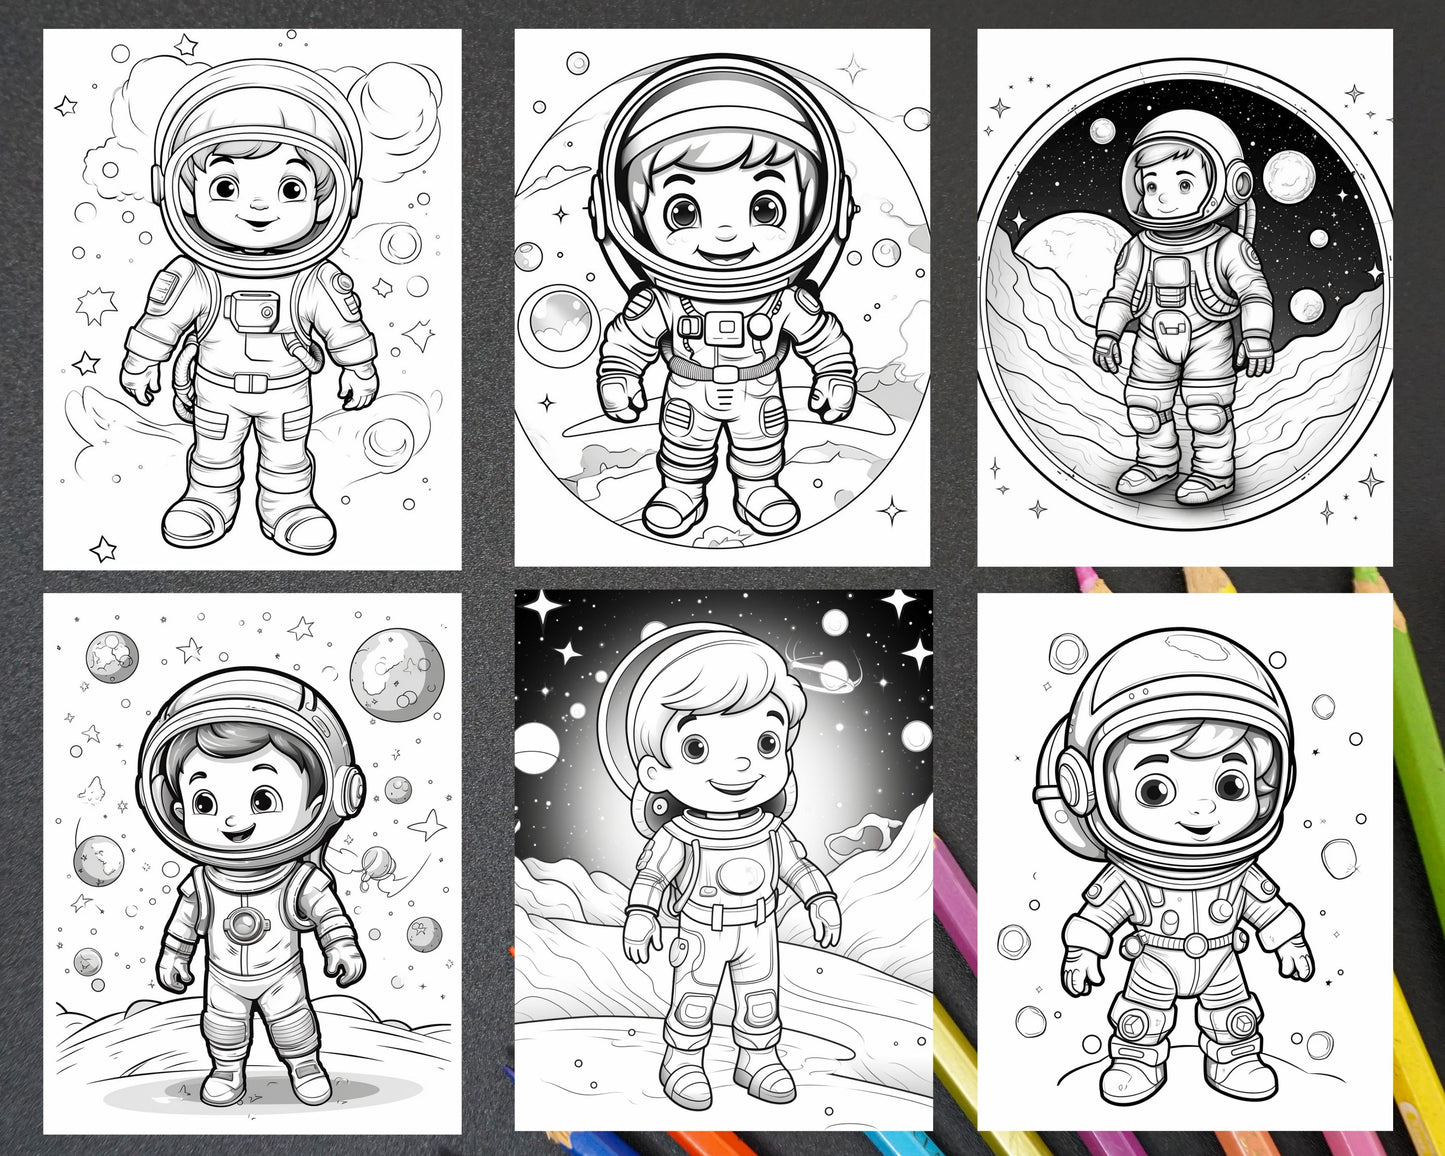 Cute astronaut coloring page for kids, Fun outer space coloring activity sheet, Printable astronaut adventures coloring page, Children's space-themed coloring illustration, Coloring sheet for imaginative play, Educational space exploration coloring page, Creative learning with astronaut artwork